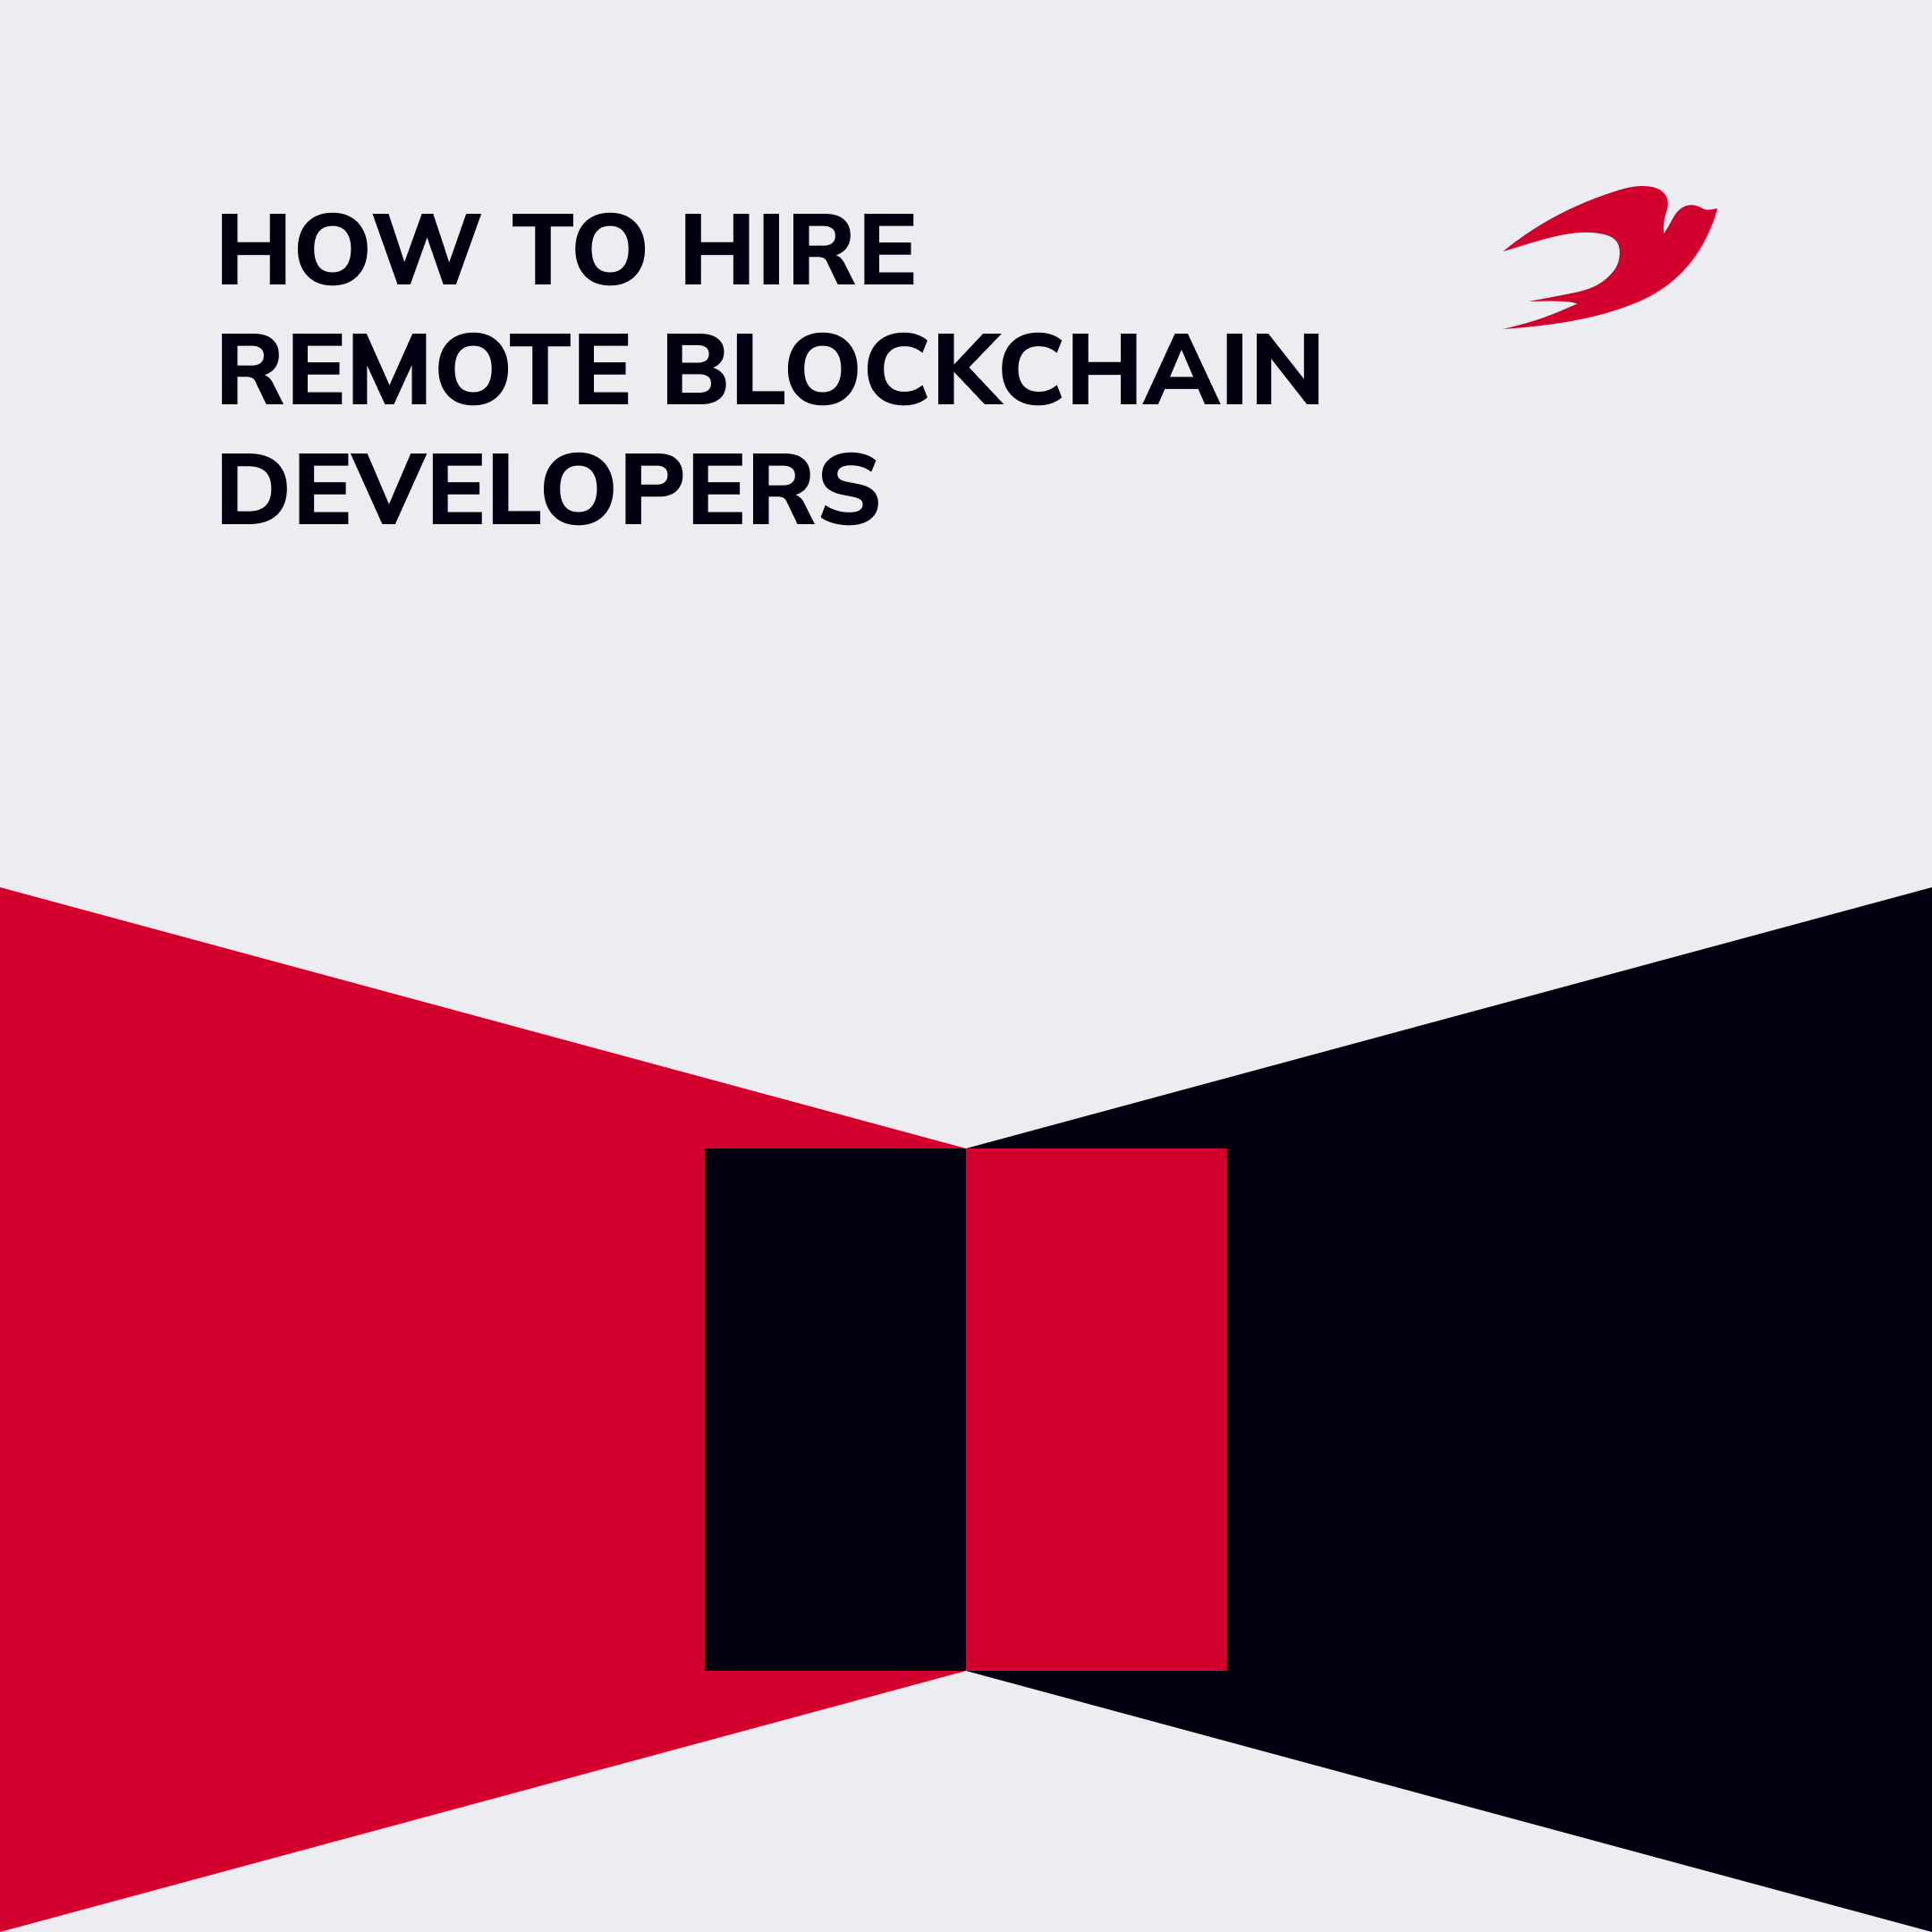 How to Hire Remote Blockchain Developers